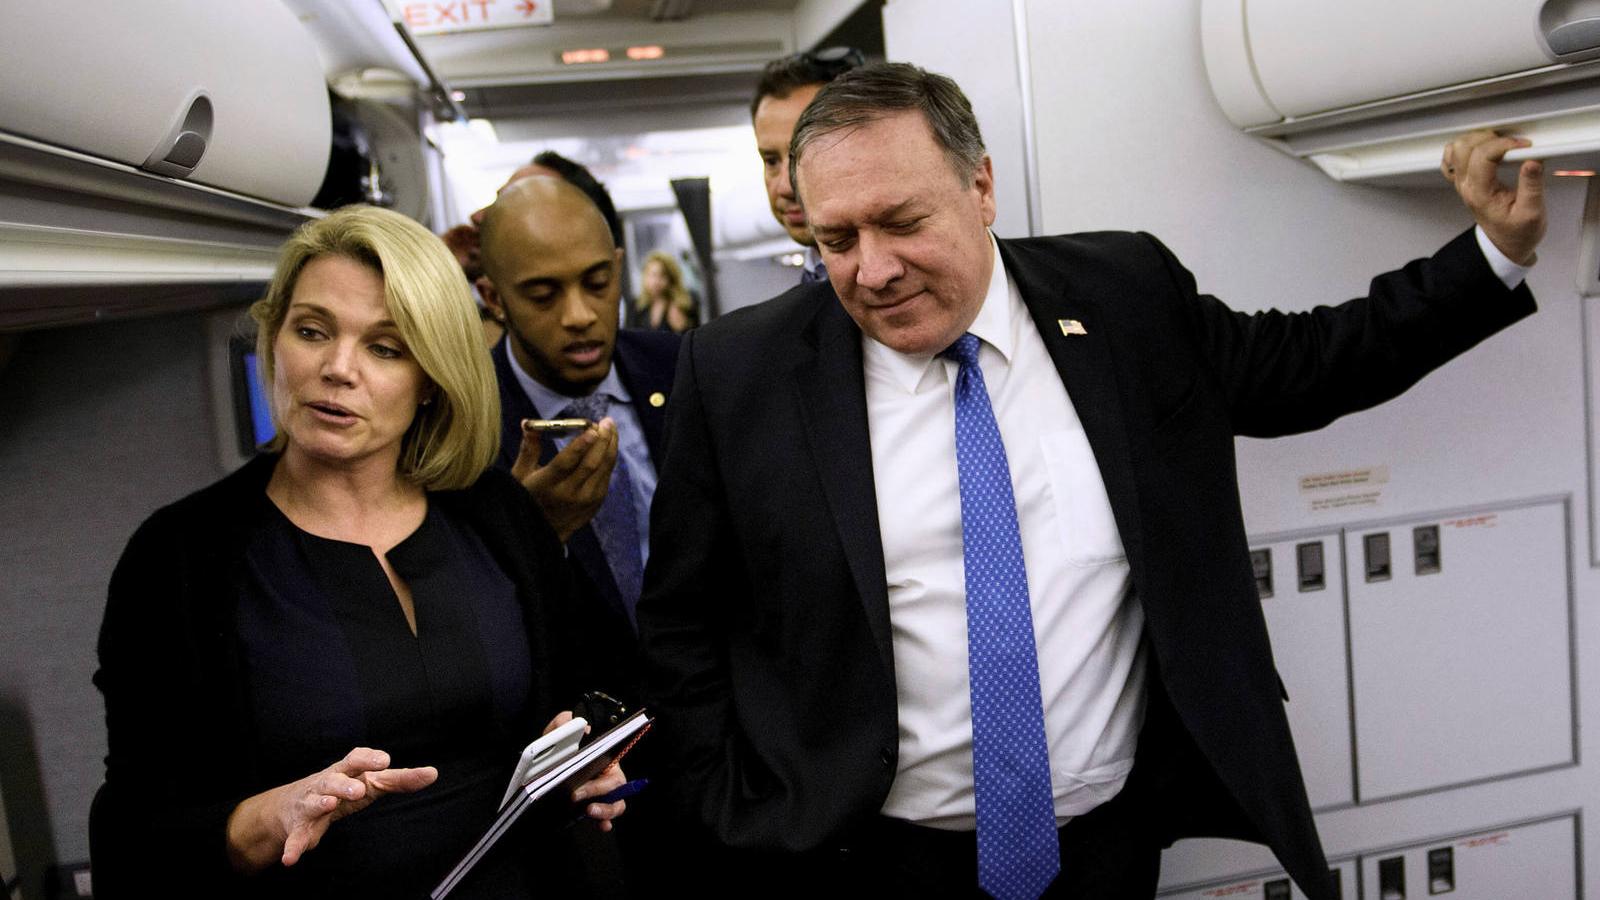 Heather Nauert and Mike Pompeo wear navy blue suits and speak with reporters inside a plane. 